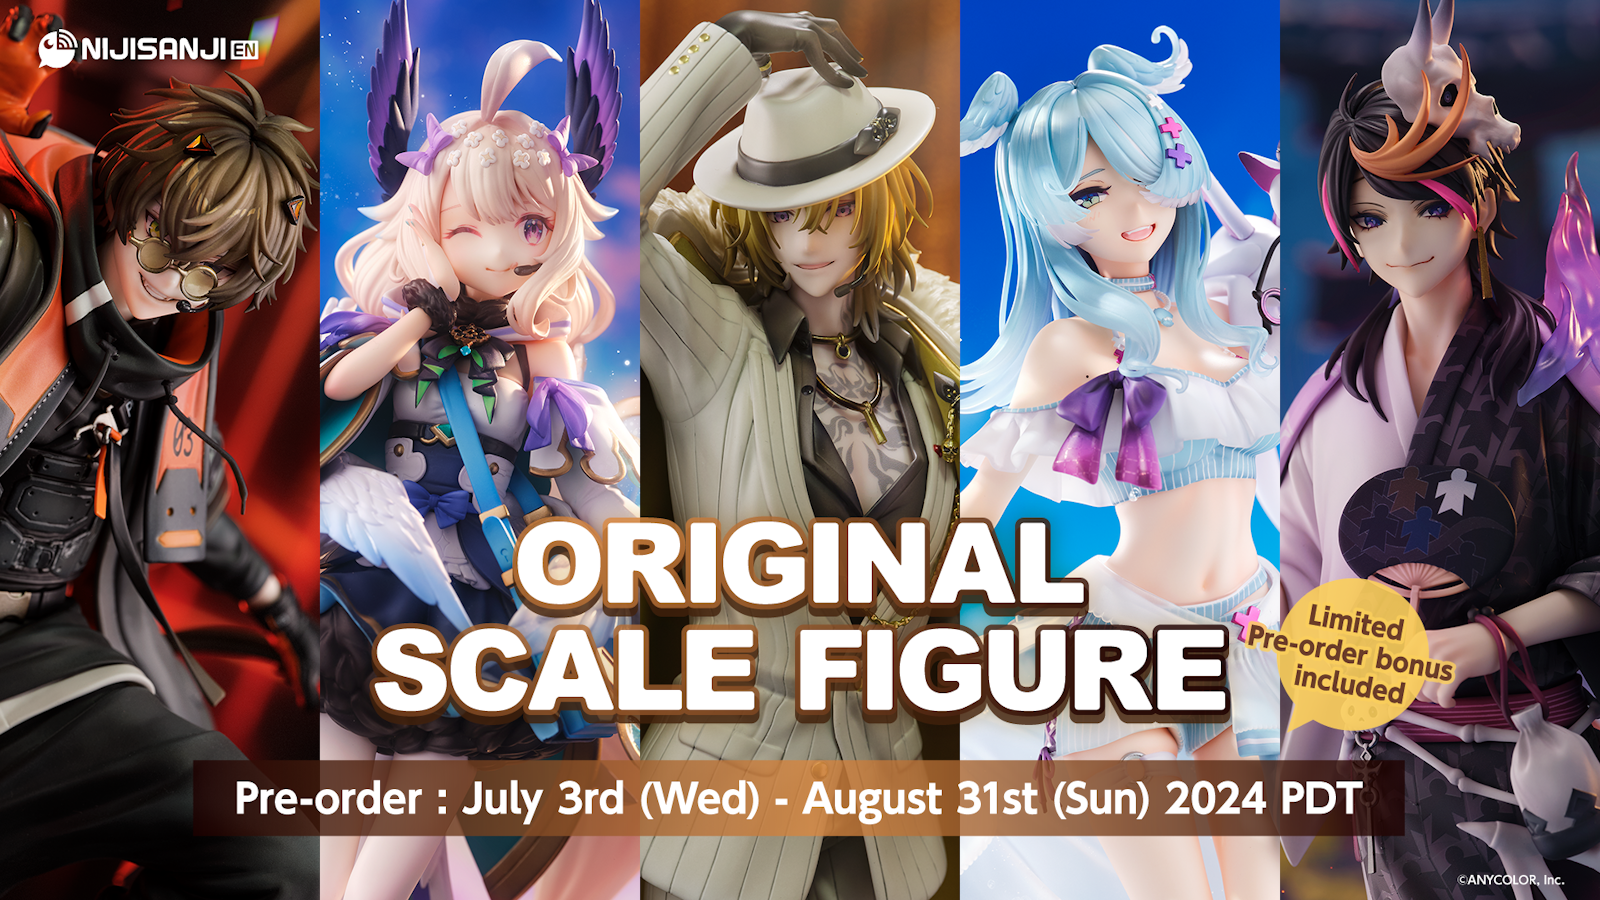 NIJISANJI EN Announces Release of Original Scale Figure Series and Life-Size Statue Exhibit at Anime Expo 2024!